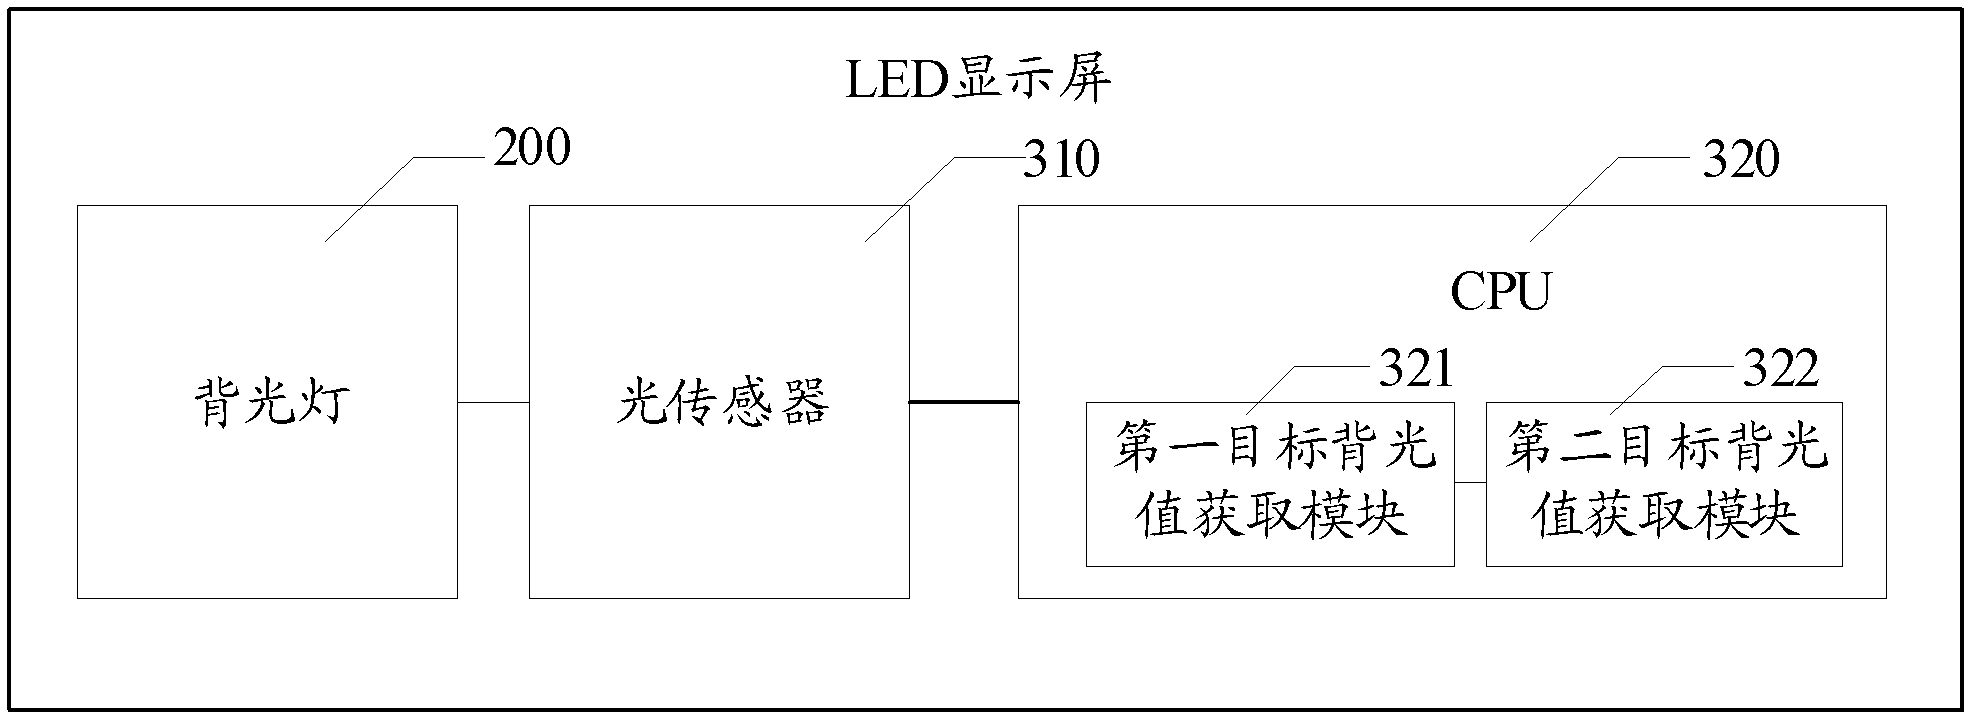 Method for improving energy efficiency index of LED (light-emitting diode) display screen and LED display screen